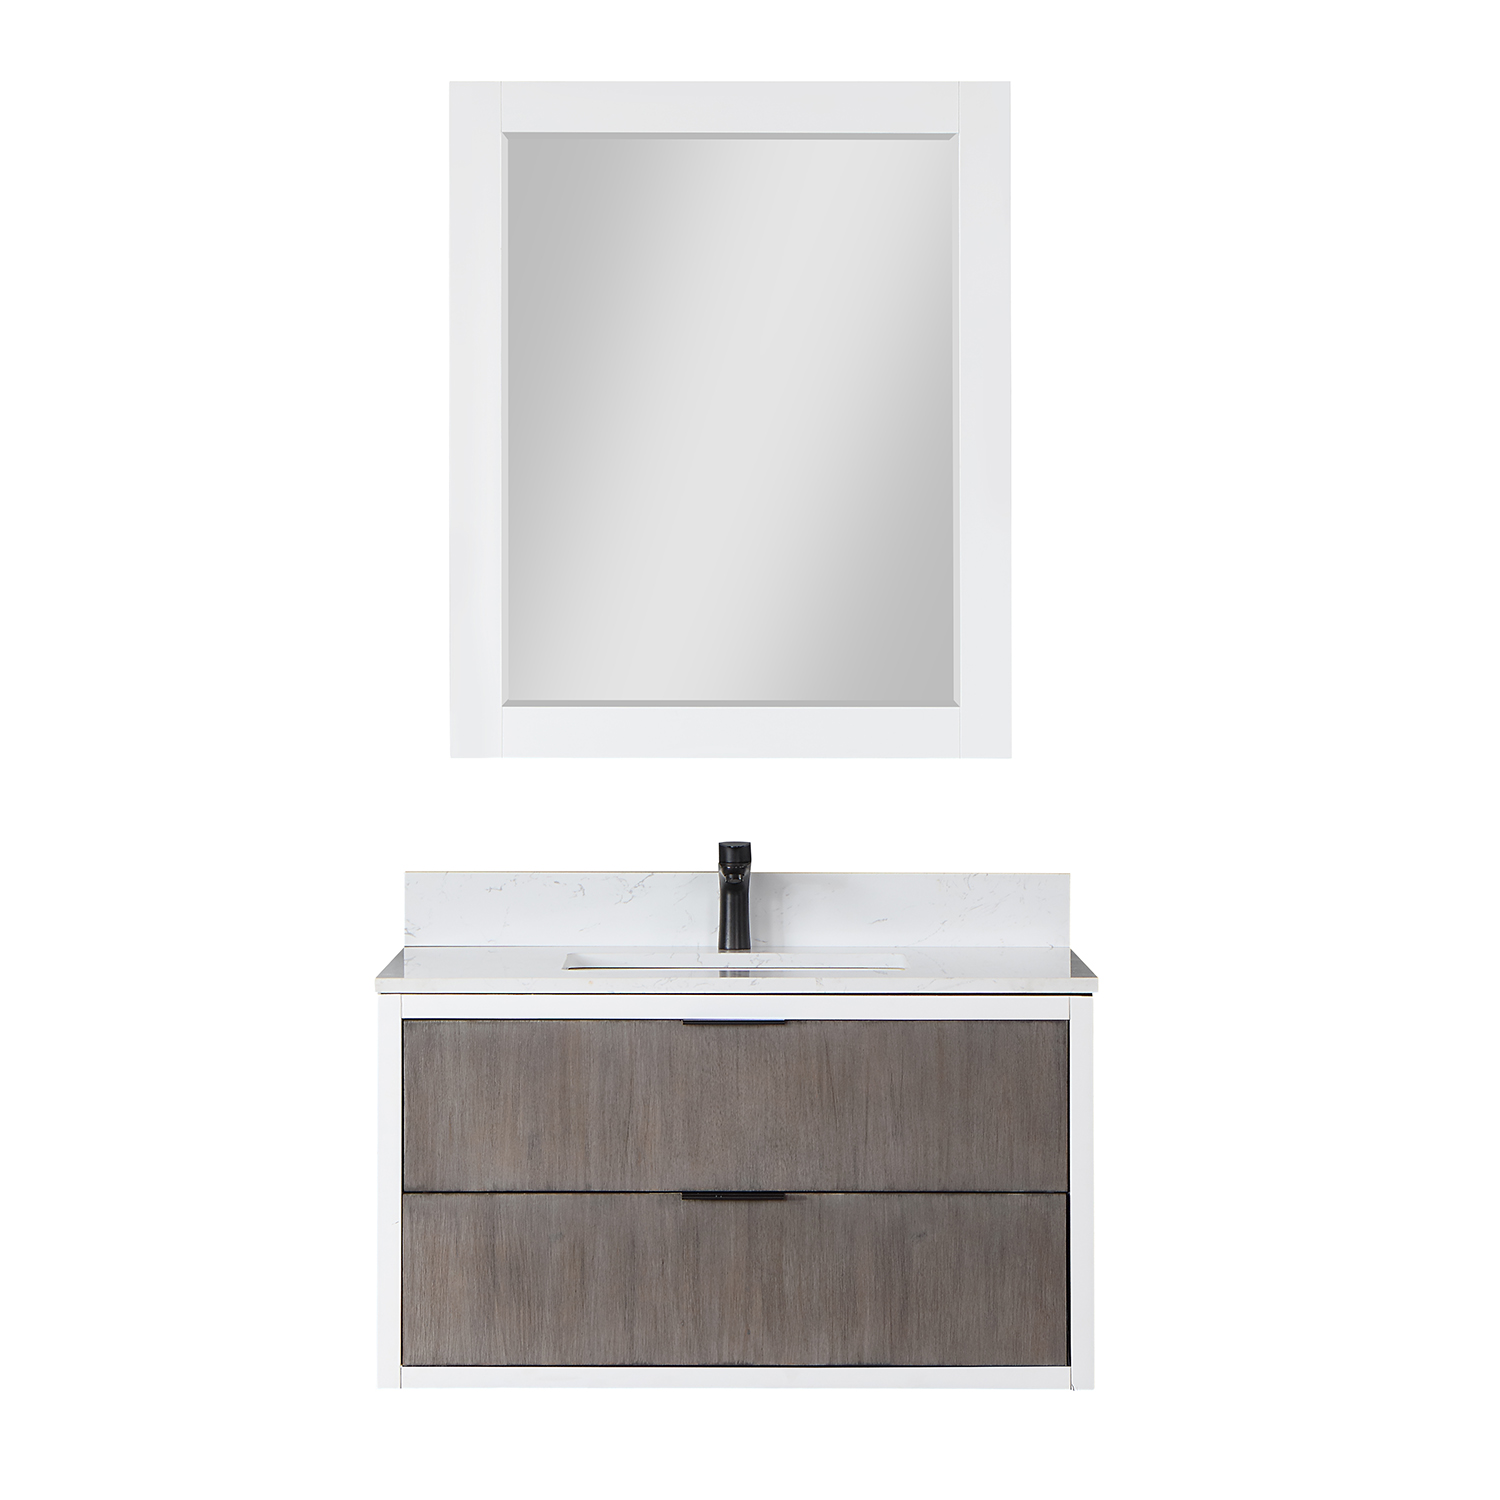 Issac Edwards Collection 36" Single Bathroom Vanity in Classical Gray with Carrara White Composite Stone Countertop without Mirror  